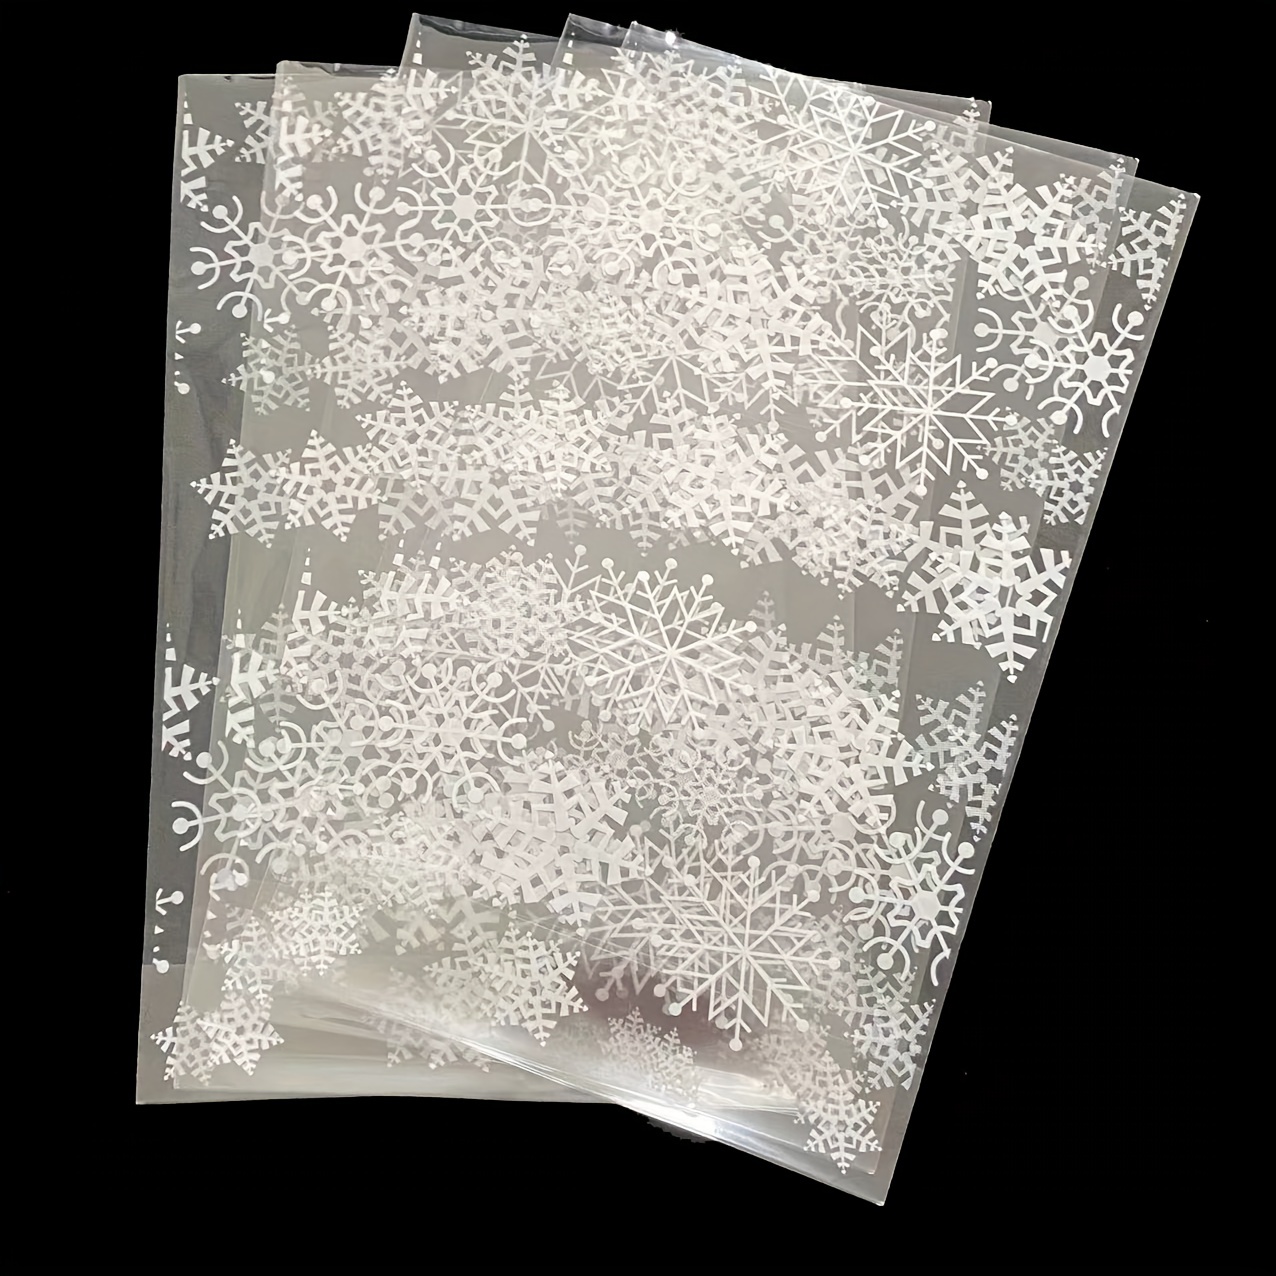 

100pcs White Snowflake Candy Bags Cellophane Plastic Gift Bags, With 100 Golden Tie, Suitable For Celebration Party Supplies, Gifts, , Candy, Plastic Snack Bags Eid Al-adha Mubarak